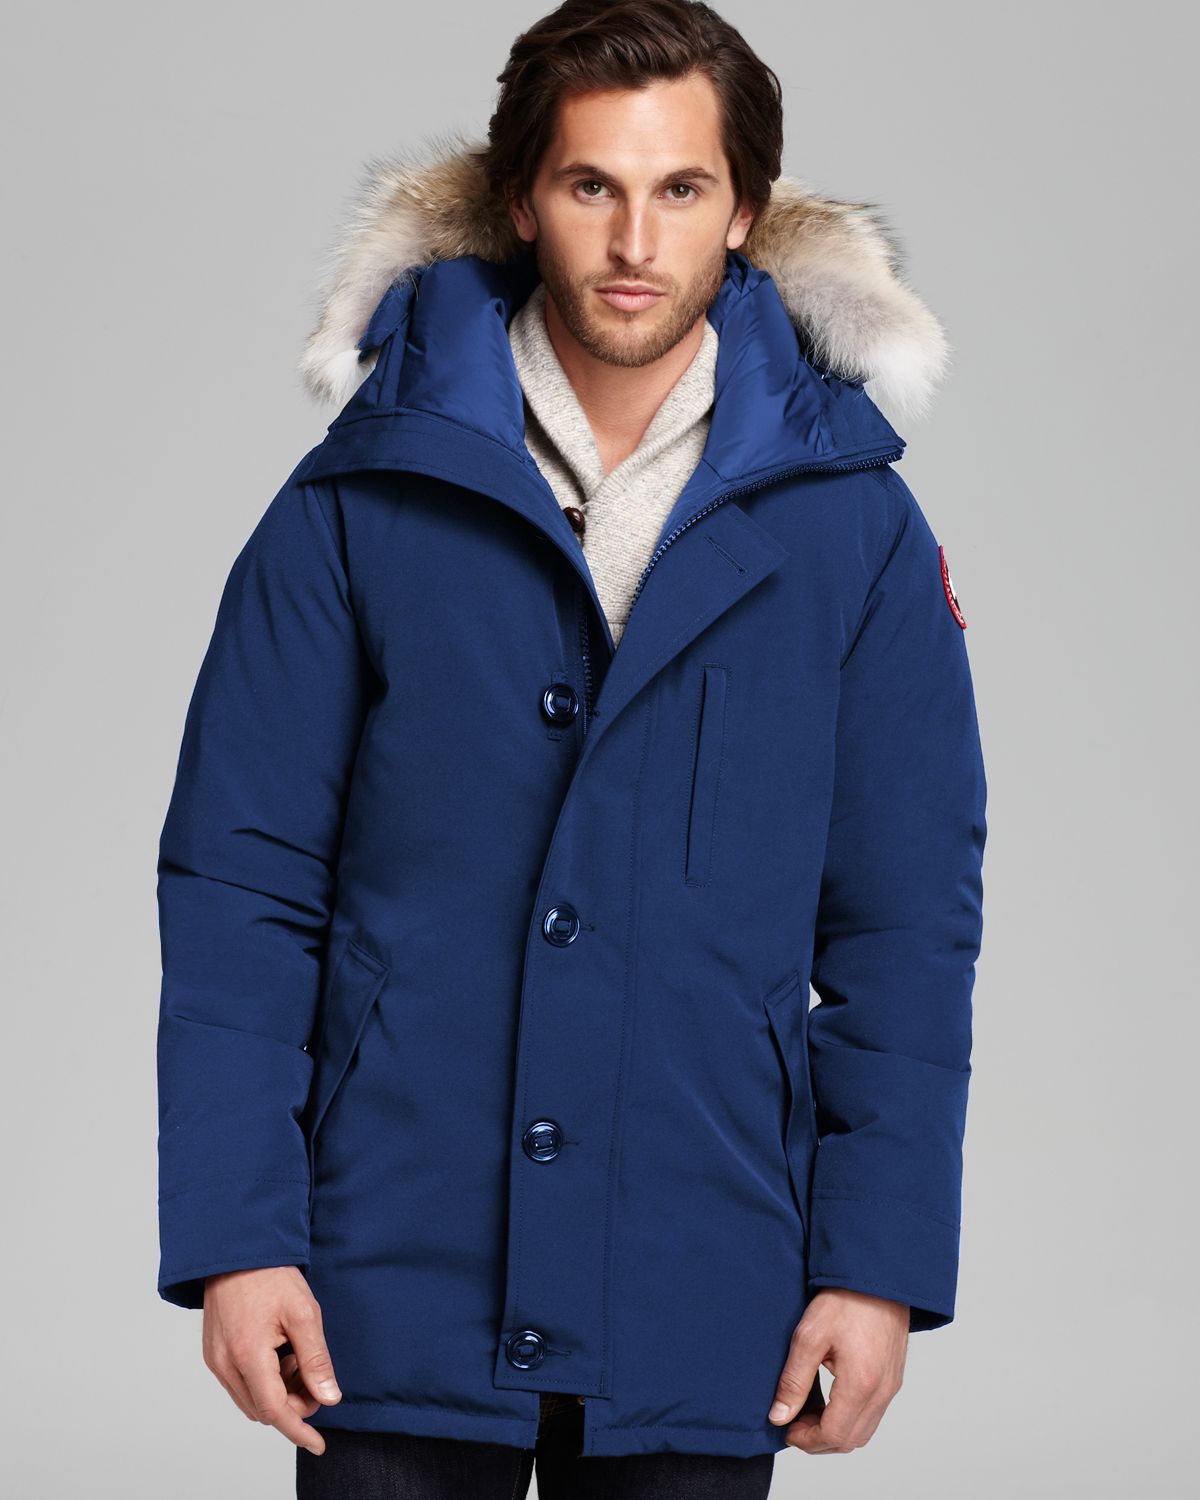 Lyst - Canada goose Chateau Parka With Fur Hood in Blue for Men